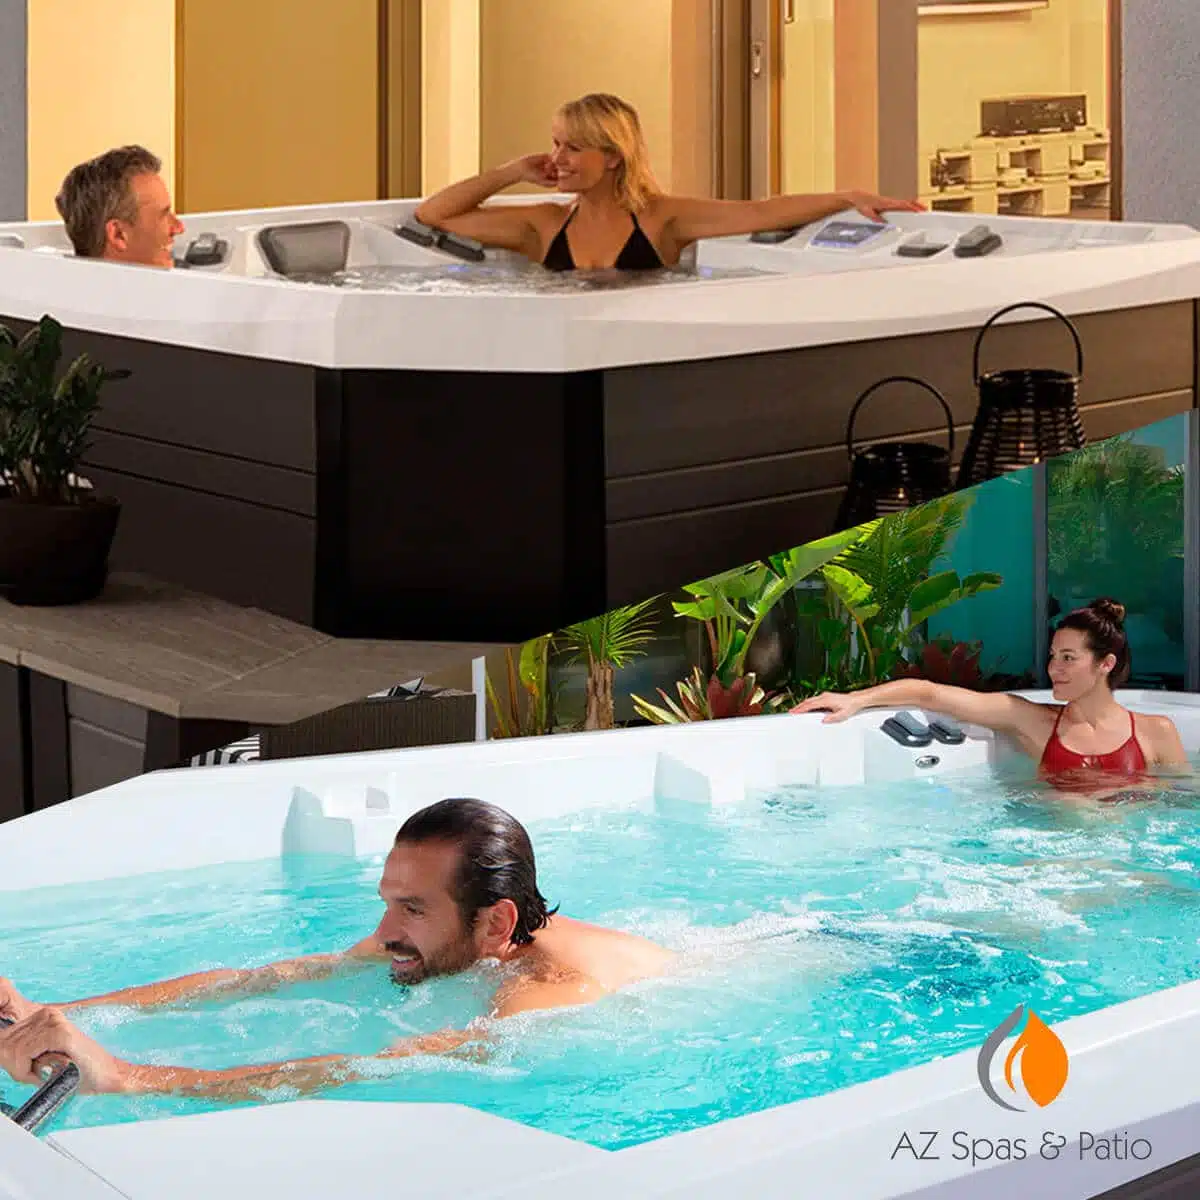 Choosingf the right option between a Swim Spa and Hot tub with tips from AZ Spas & Patio blog